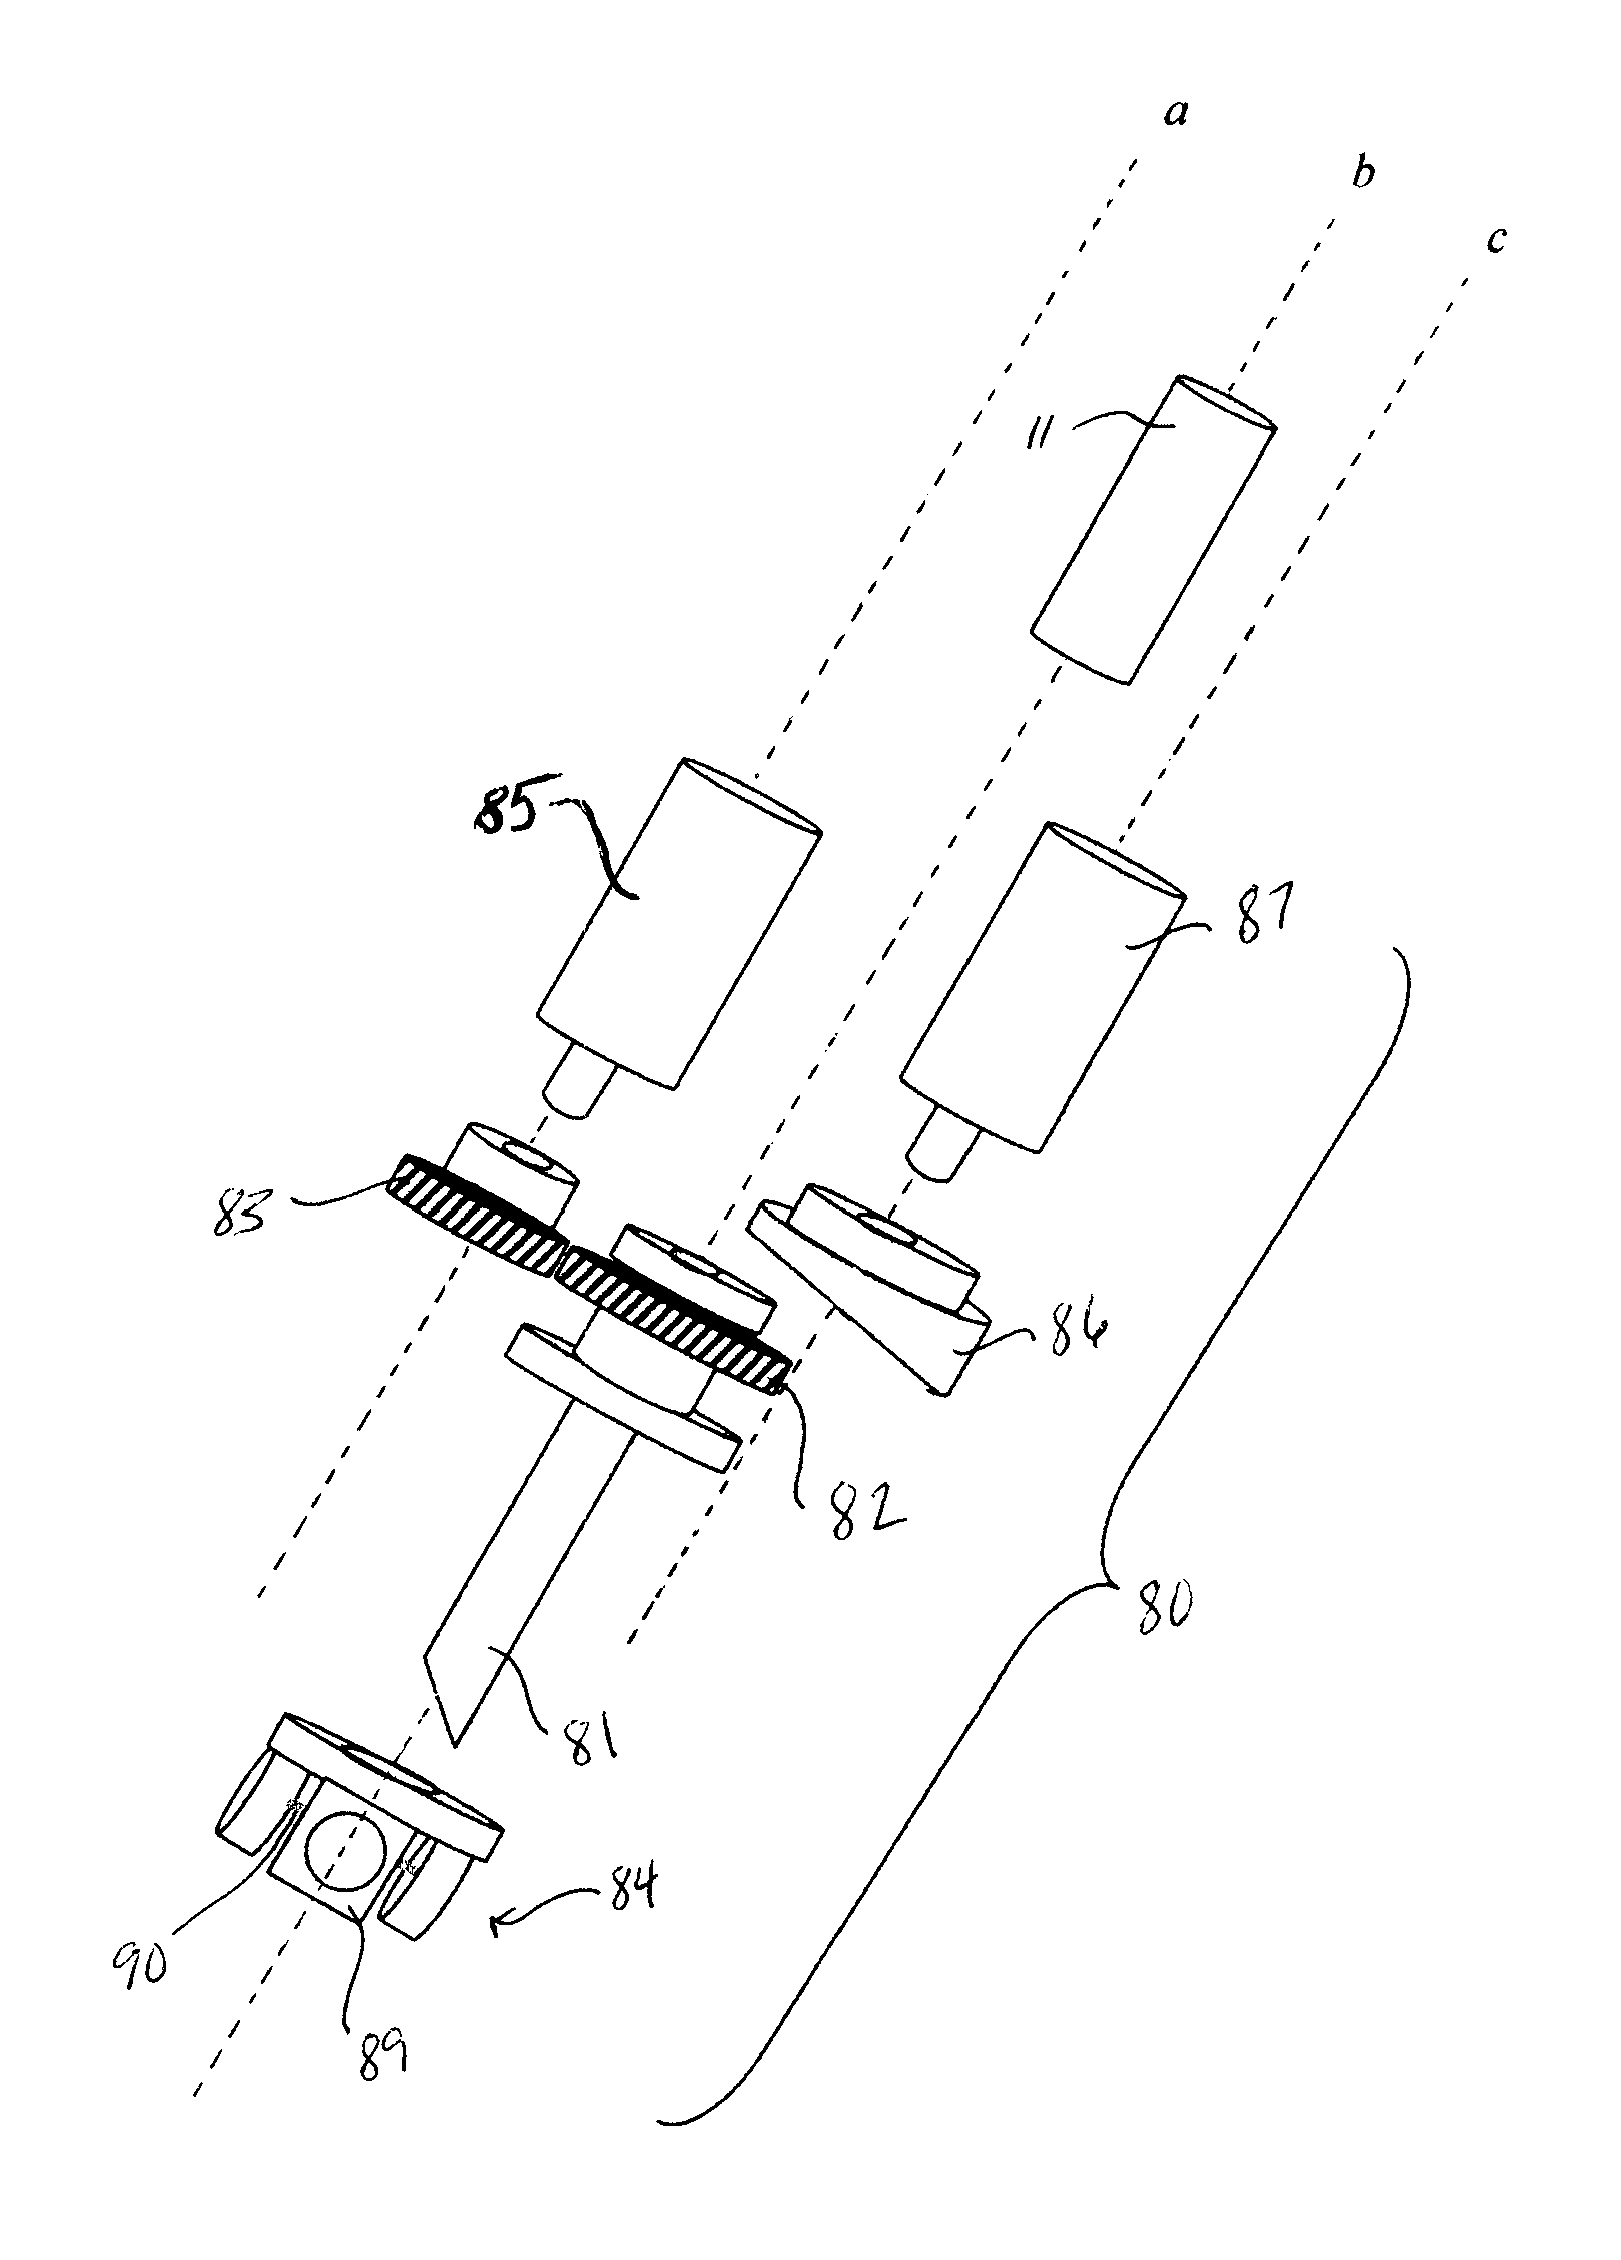 Stand-alone scanning laser device